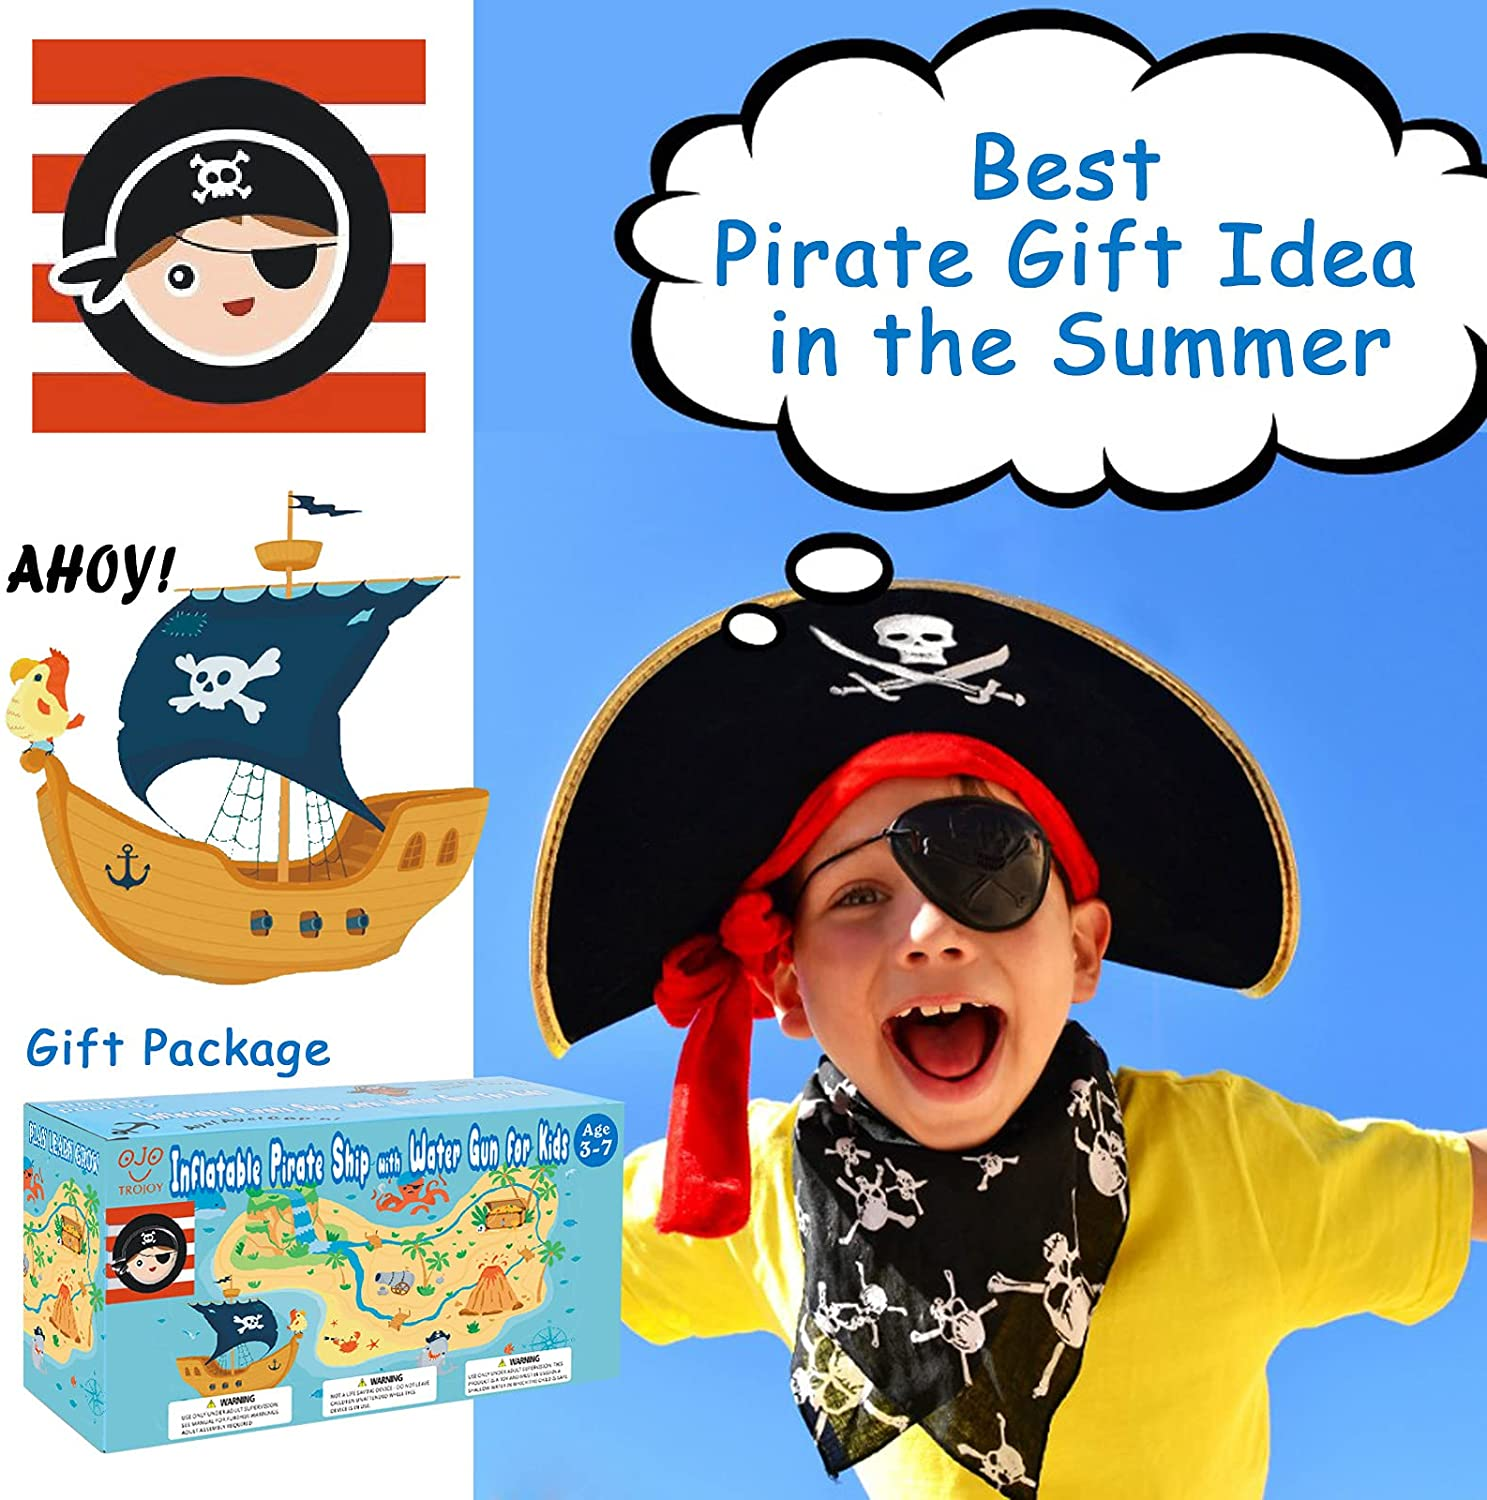 Pirate Ship Toys for Boys Girls 3 4 5 6 7 TROJOY 3-in-1 Pool Floats for Kids Toddler Pool Toys with Water Gun Kids Inflatable Boat Toys Gifts for Summer Swimming Pool Party Birthday 